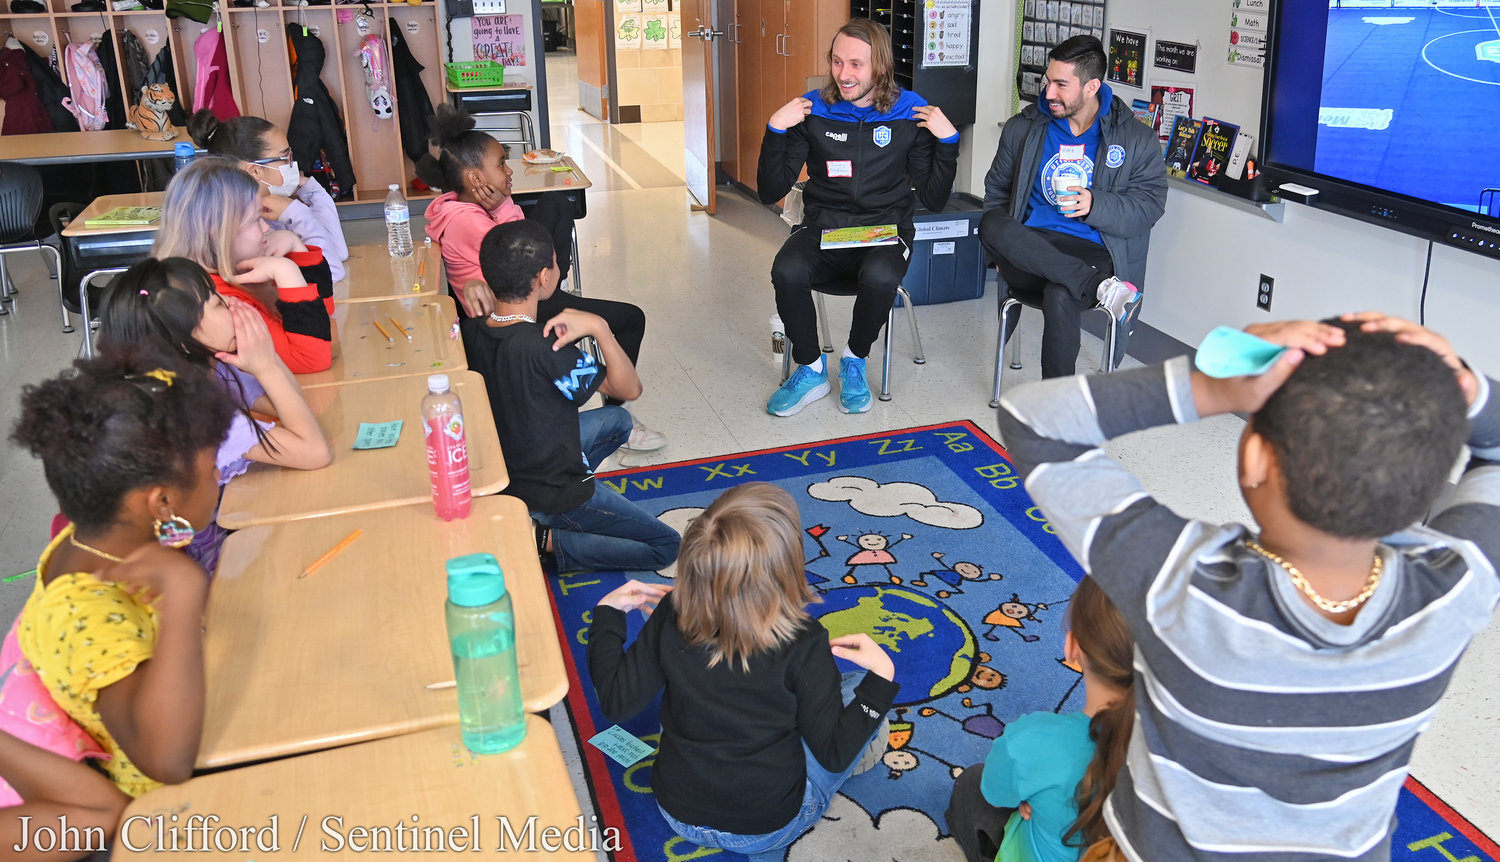 Utica City Football player Timmy Goldman plays "Simon Says" with the 3rd grade class of Jordan Penc before reading the book "Game Time" during the Community Reader's Day event at Kernan Elementary School Friday morning. Helping him is teammate Rafa Godoi.